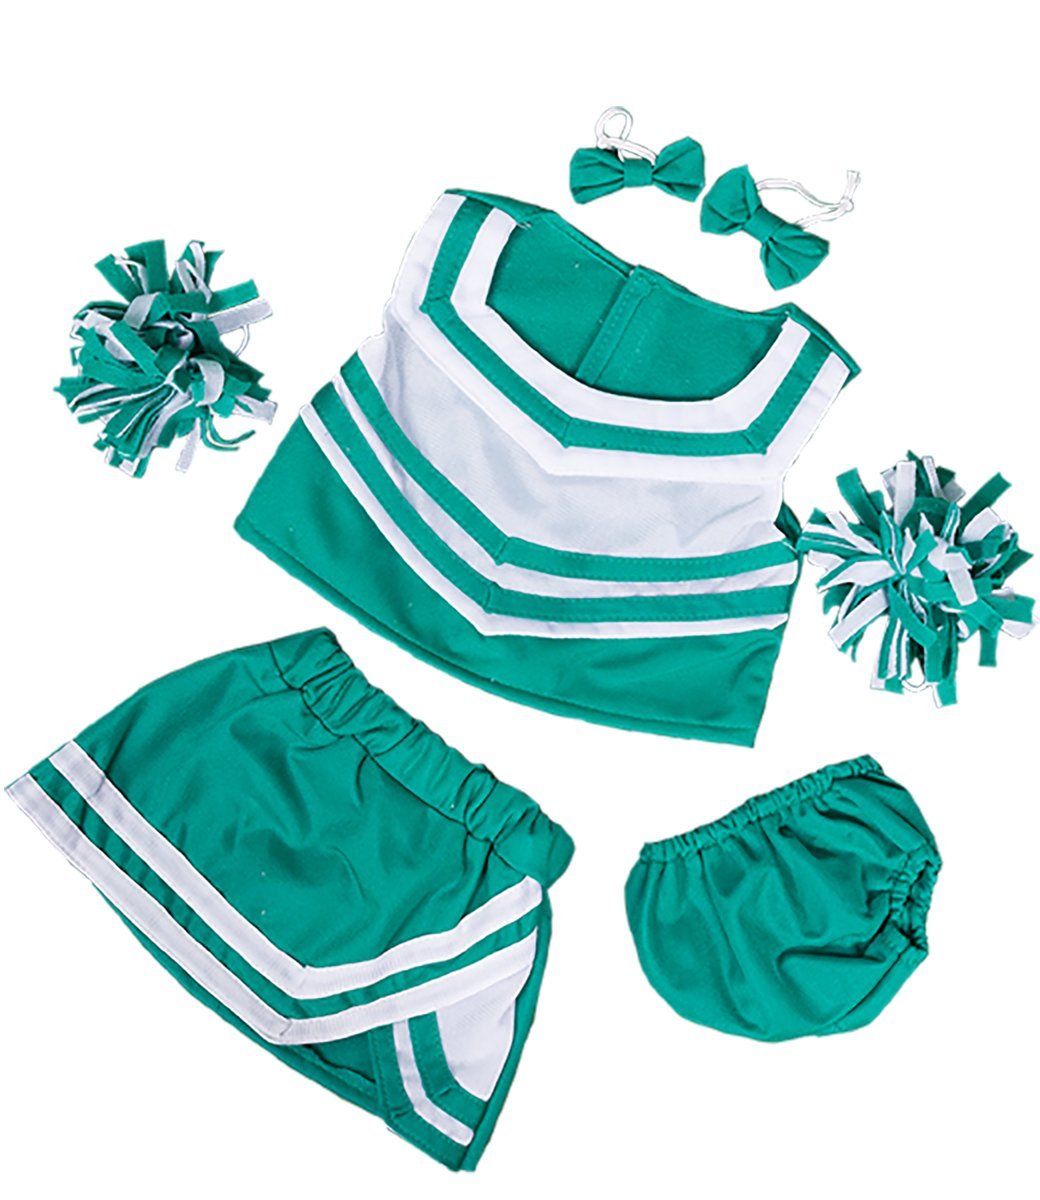 Primary image for Green & White Cheerleader Uniform Fits Most 8"-10" Webkinz, Shining Star and ...